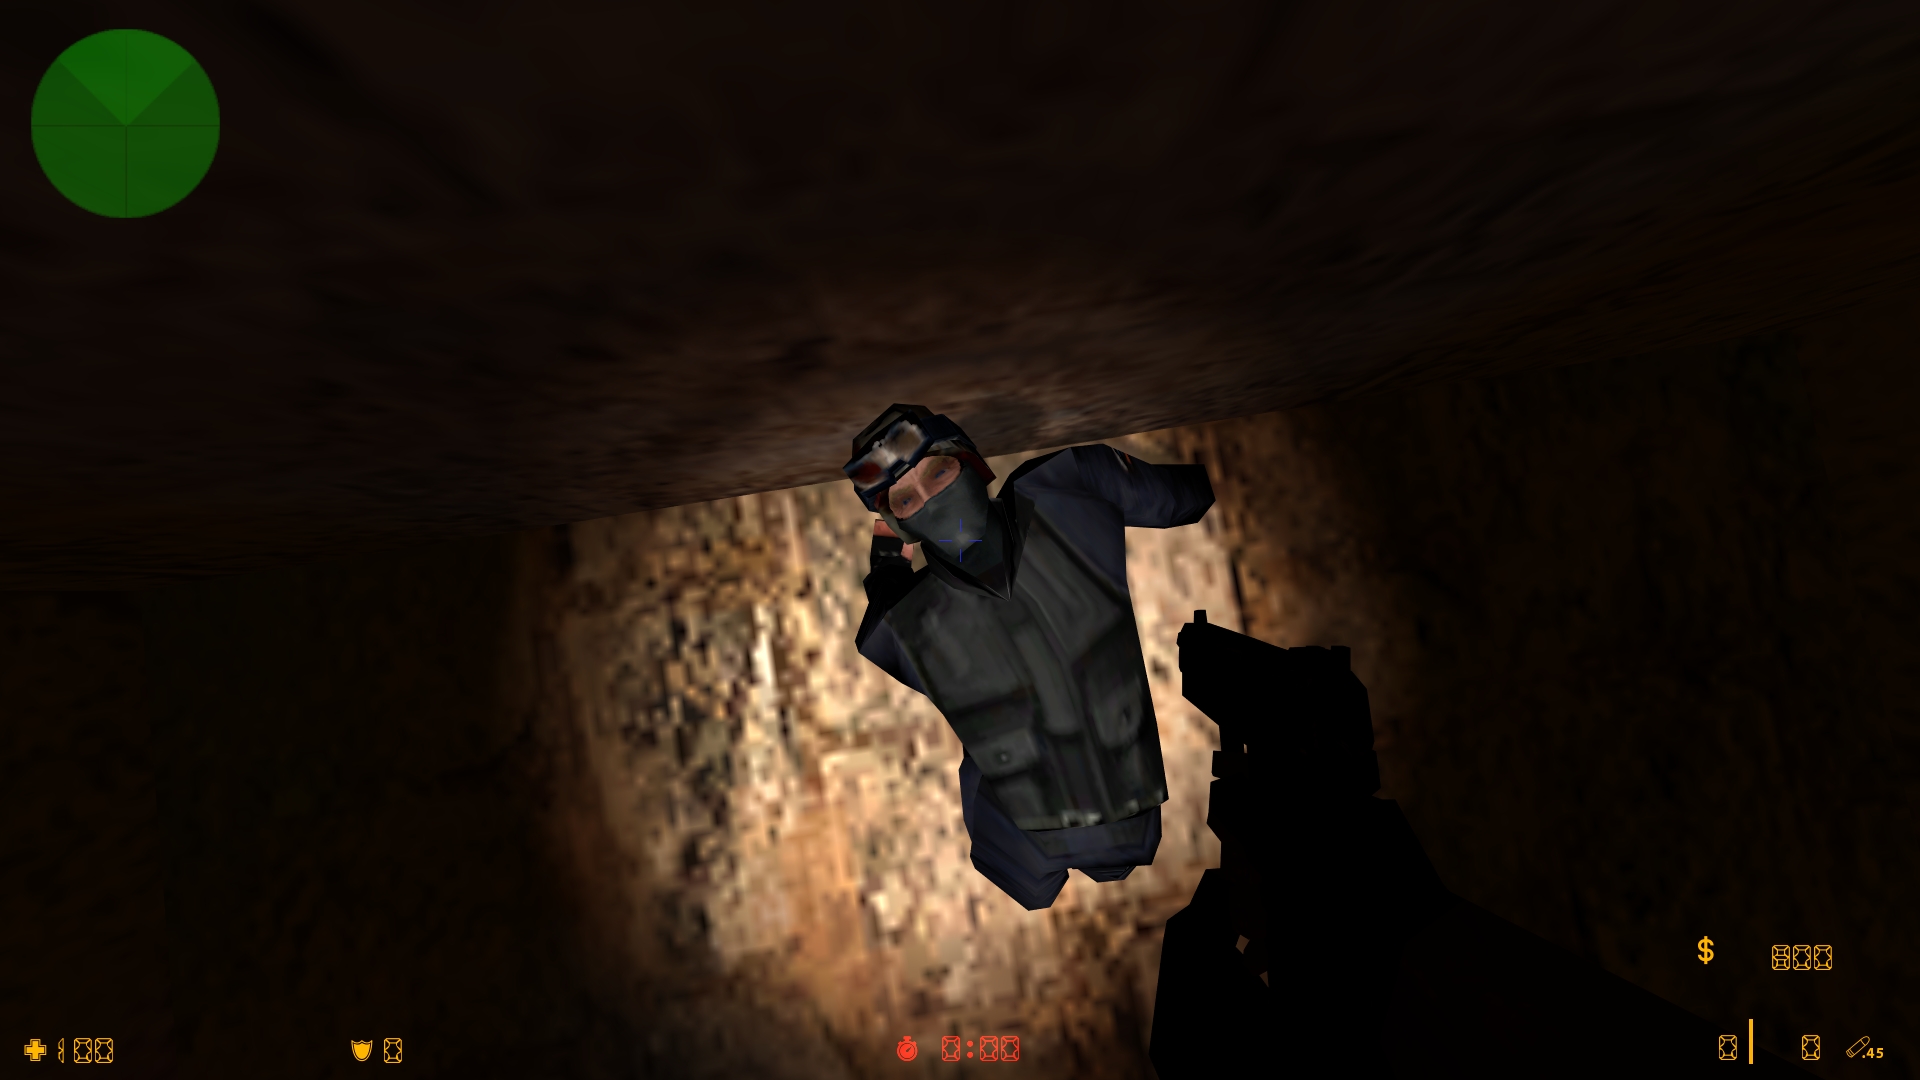 Half-Life: Counter Strike Cheat Codes for PC